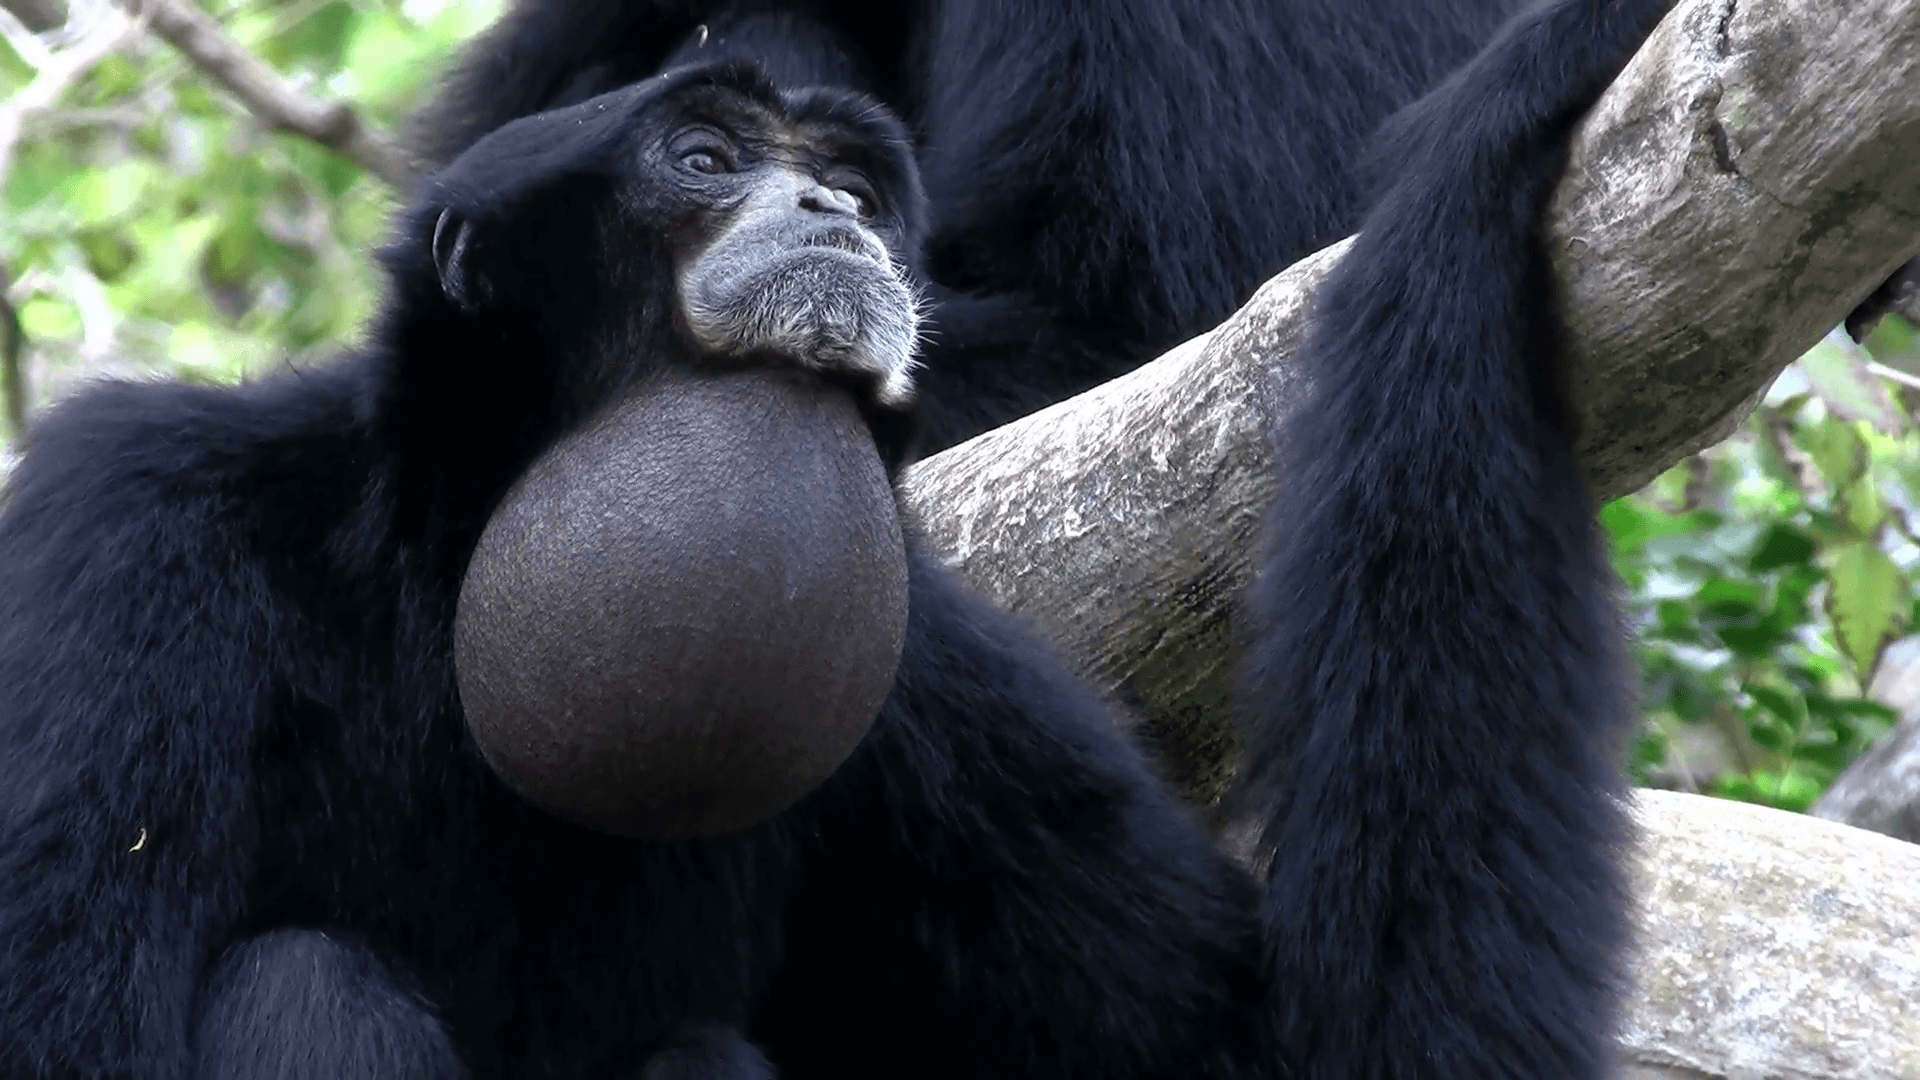 A siamang gibbon from Indonesia hangs in a tree and inflates his